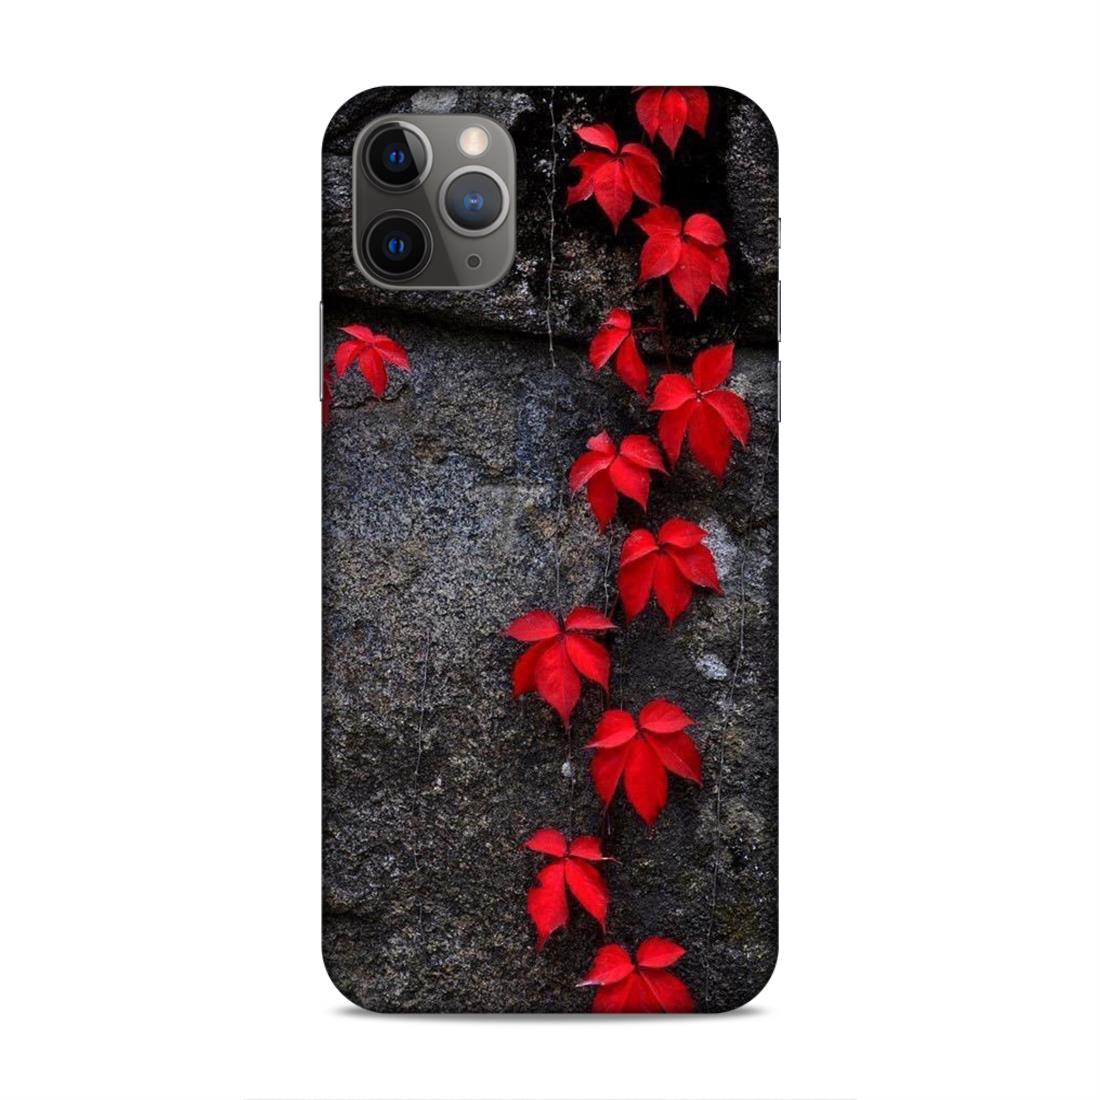 Red Leaf Series Hard Back Case For Apple iPhone 11 Pro Max